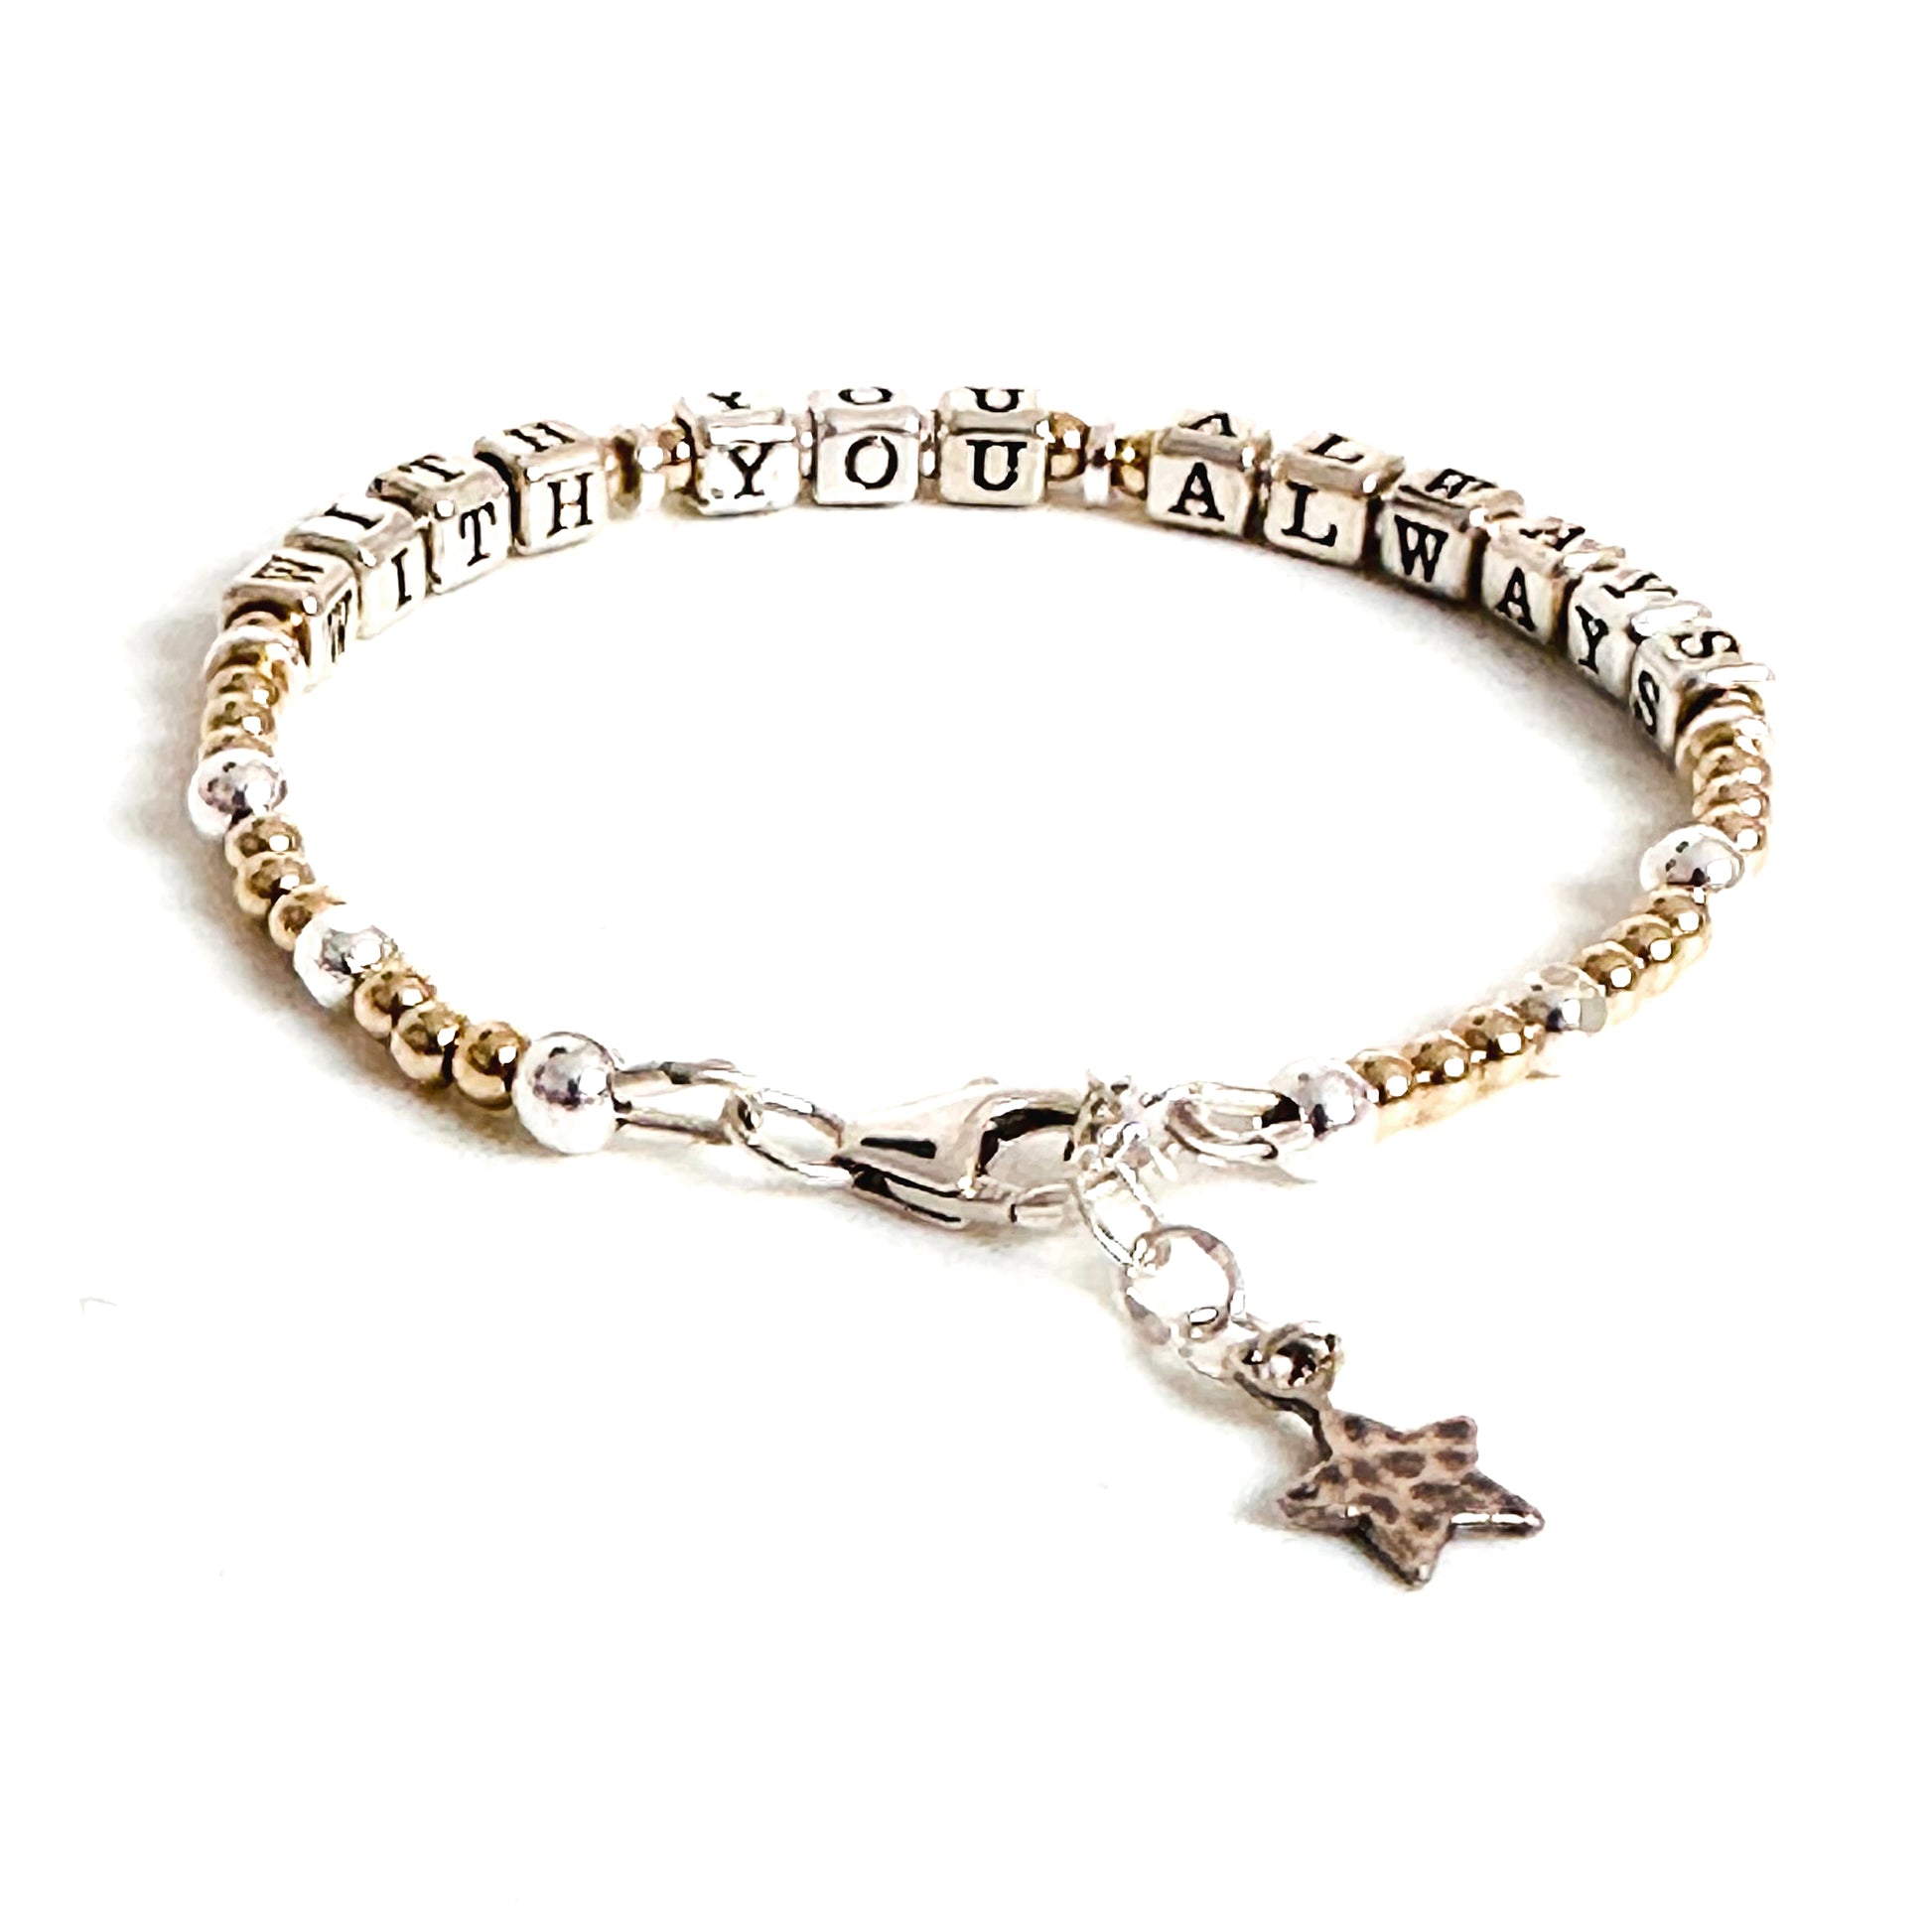 Sympathy Memorial Bereavement Gift Bracelet "With You Always" in Mixed Metals, Sterling, 14k Gold